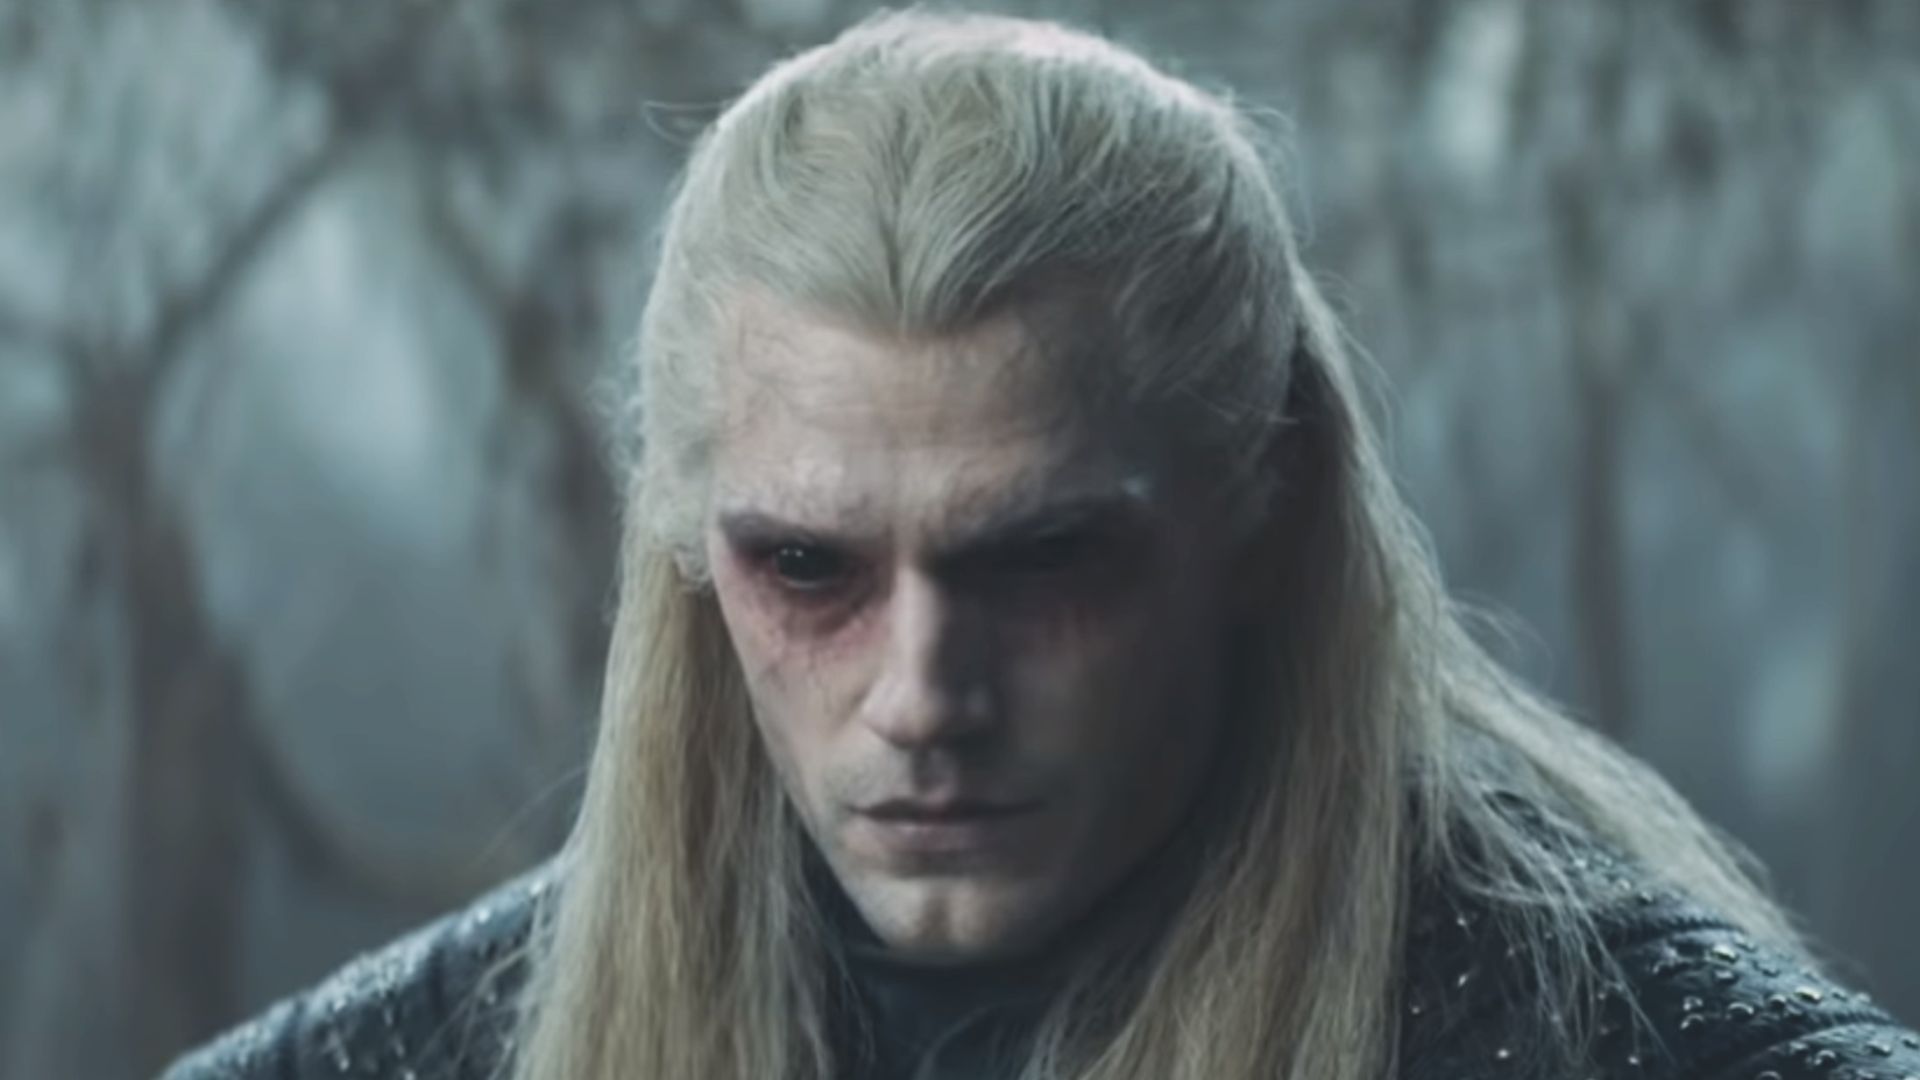 The Witcher series isn't “the poor cousin of Lord of the Rings or